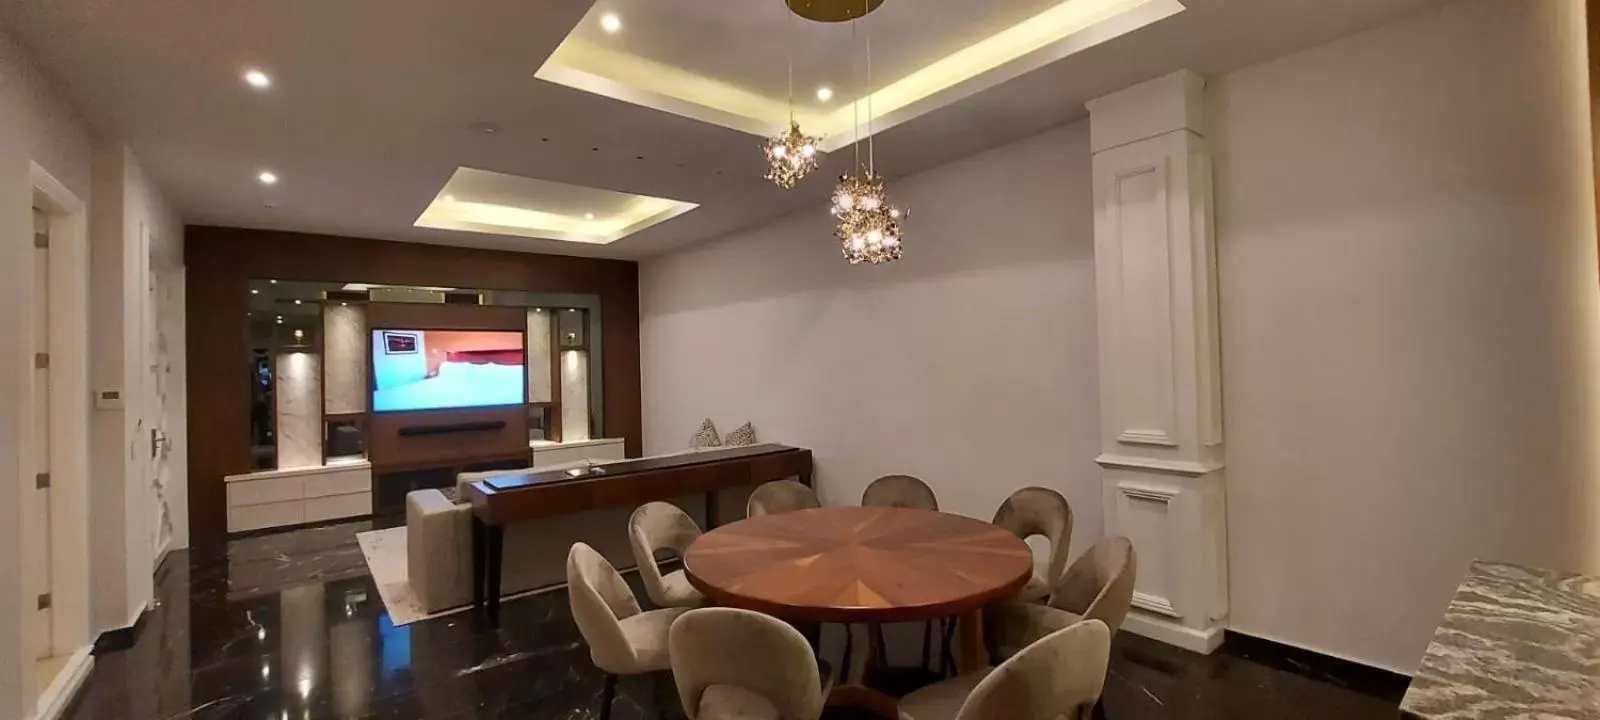 TV and multimedia, Dining Area in HOTEL & SPA MANSION SOLIS by HOTSSON